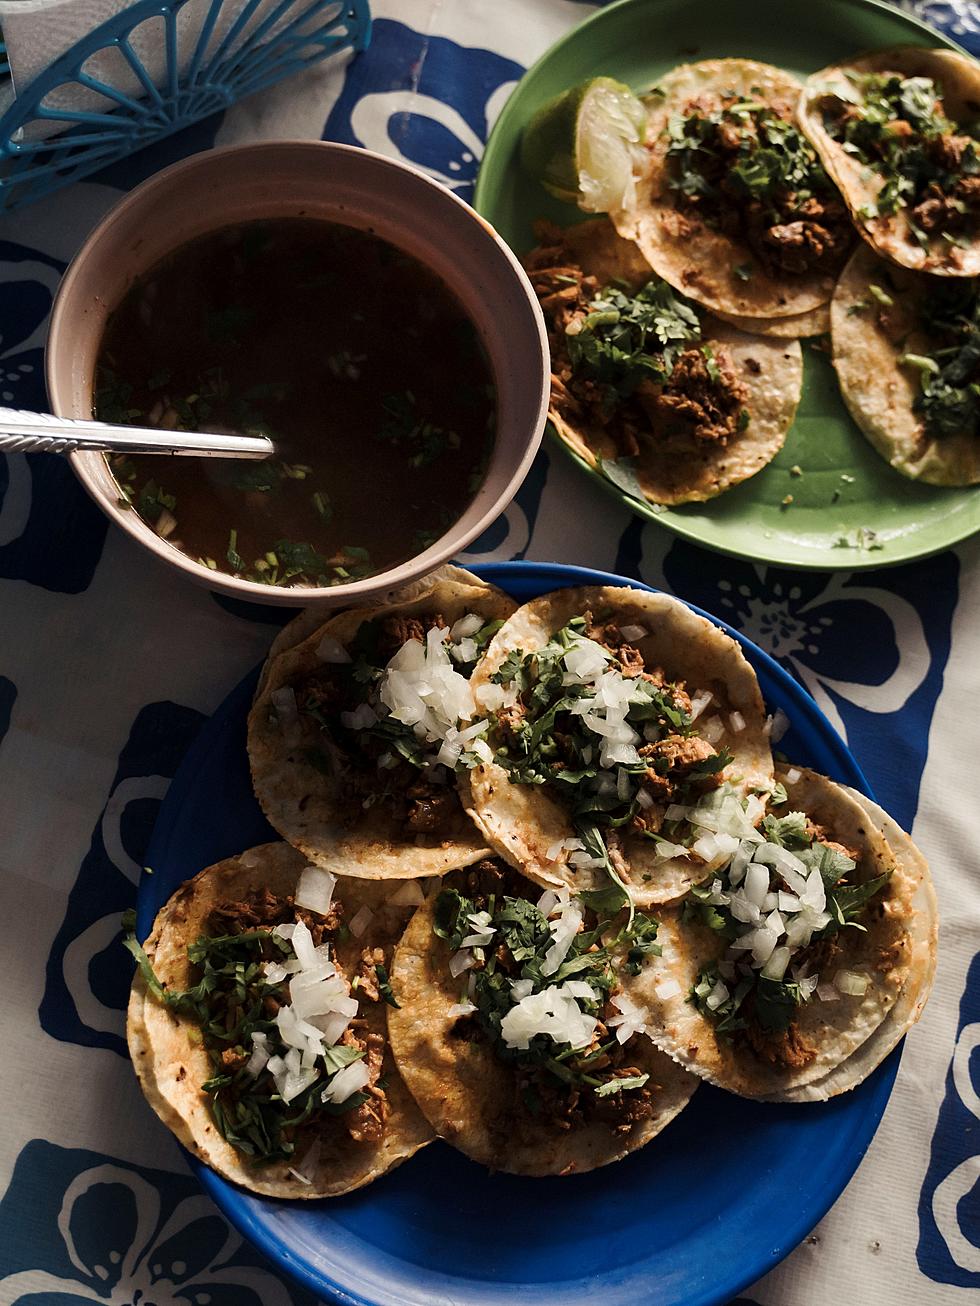 What is Birria? And Where’s the Best Place To Find It In Iowa?